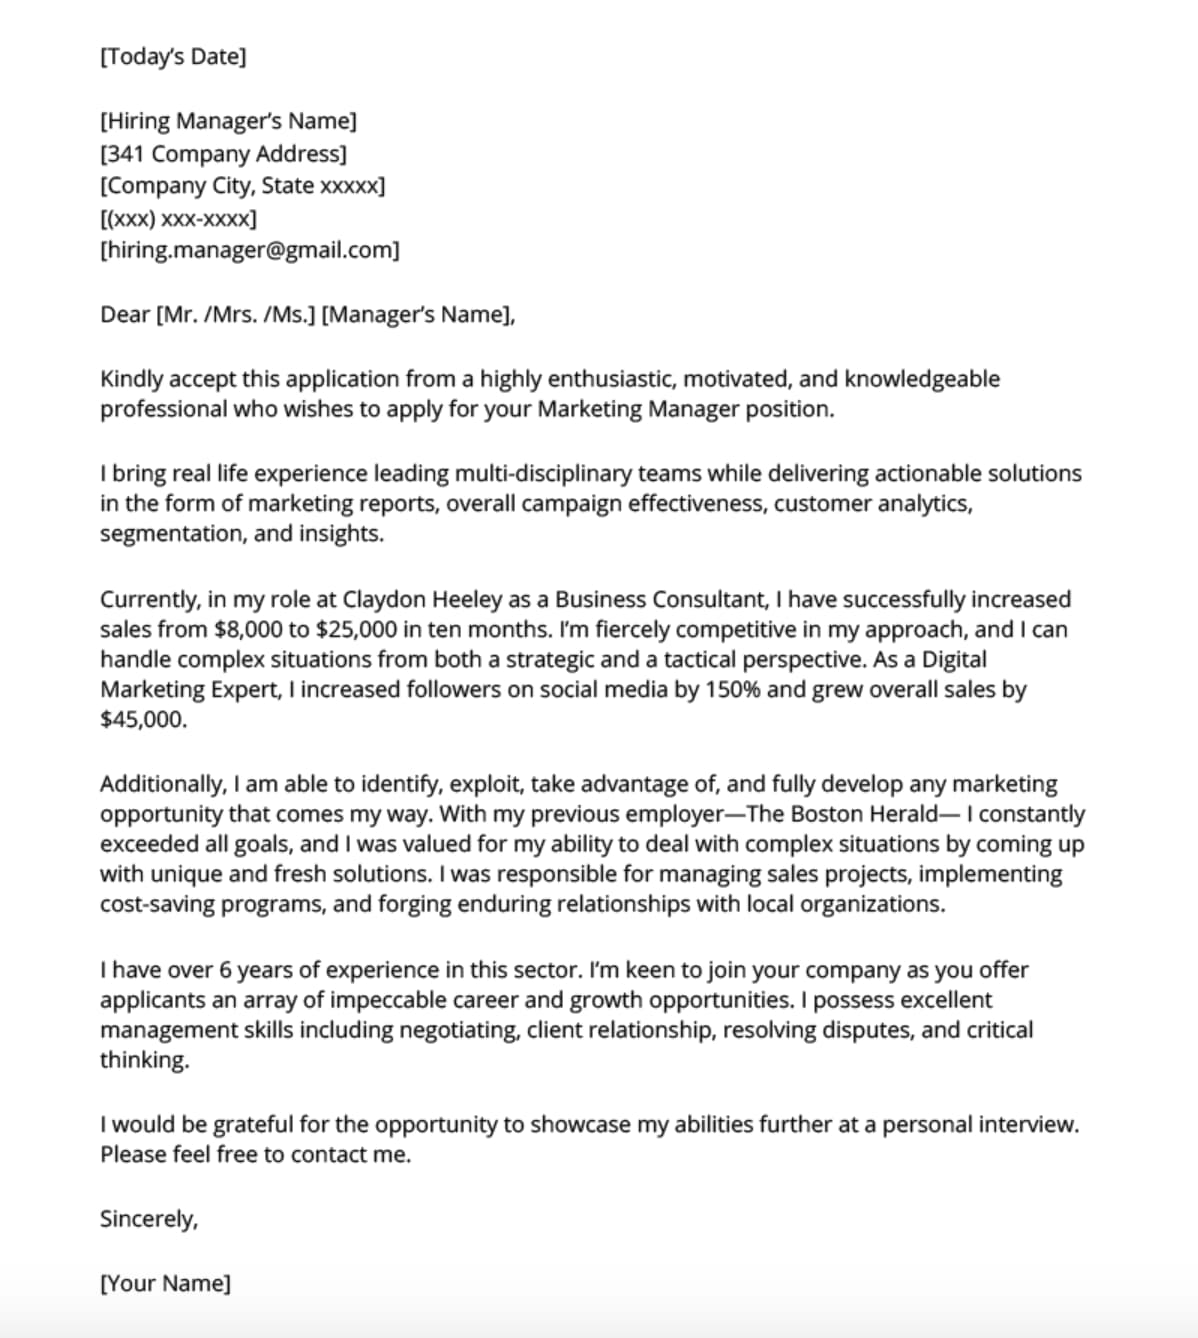 job interview cover letter template